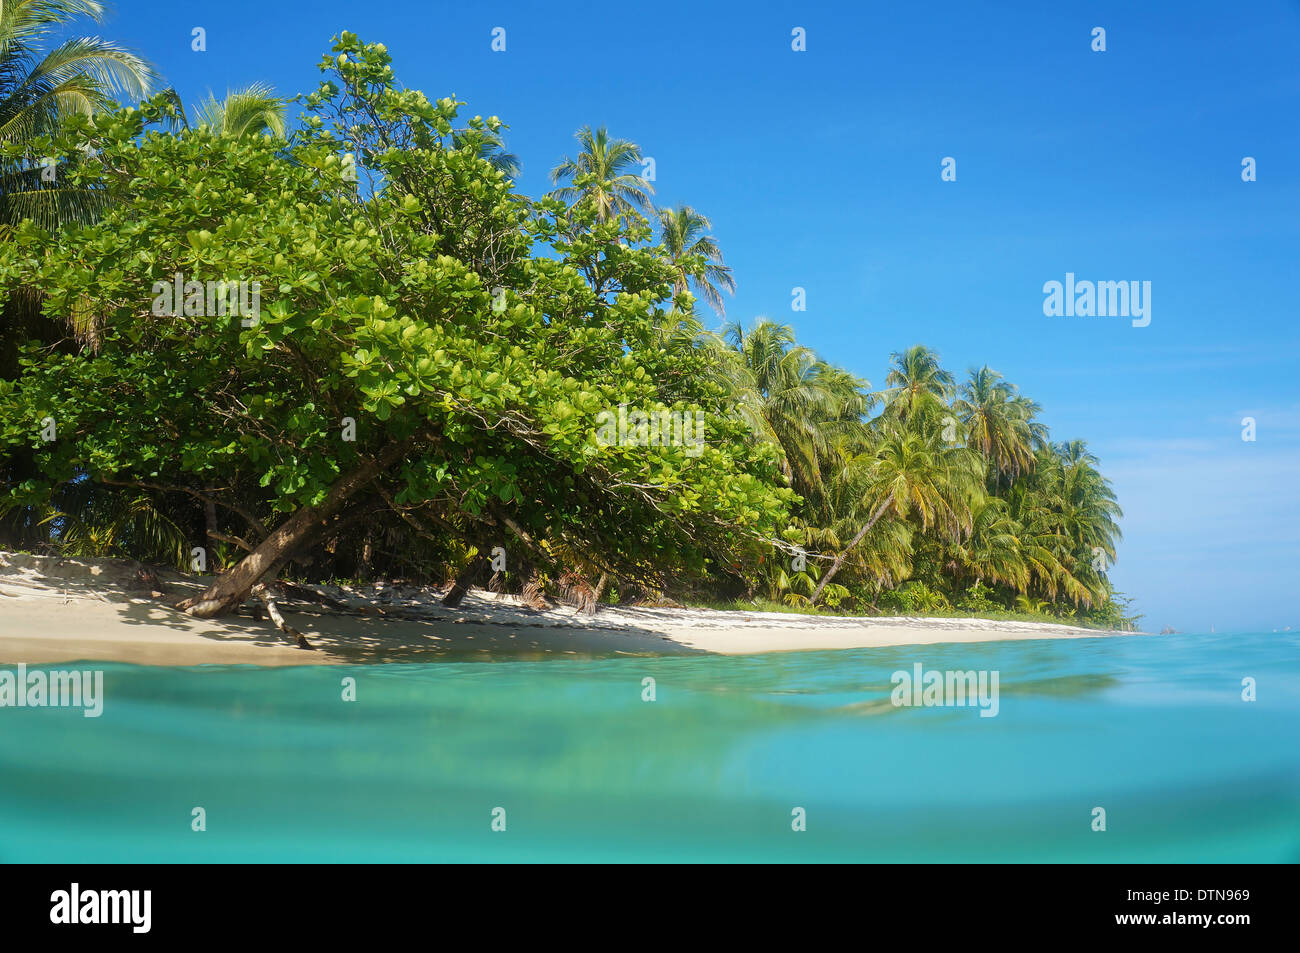 Tropical sandy beach with beautiful vegetation, view from the water surface, Caribbean sea, Costa Rica Stock Photo